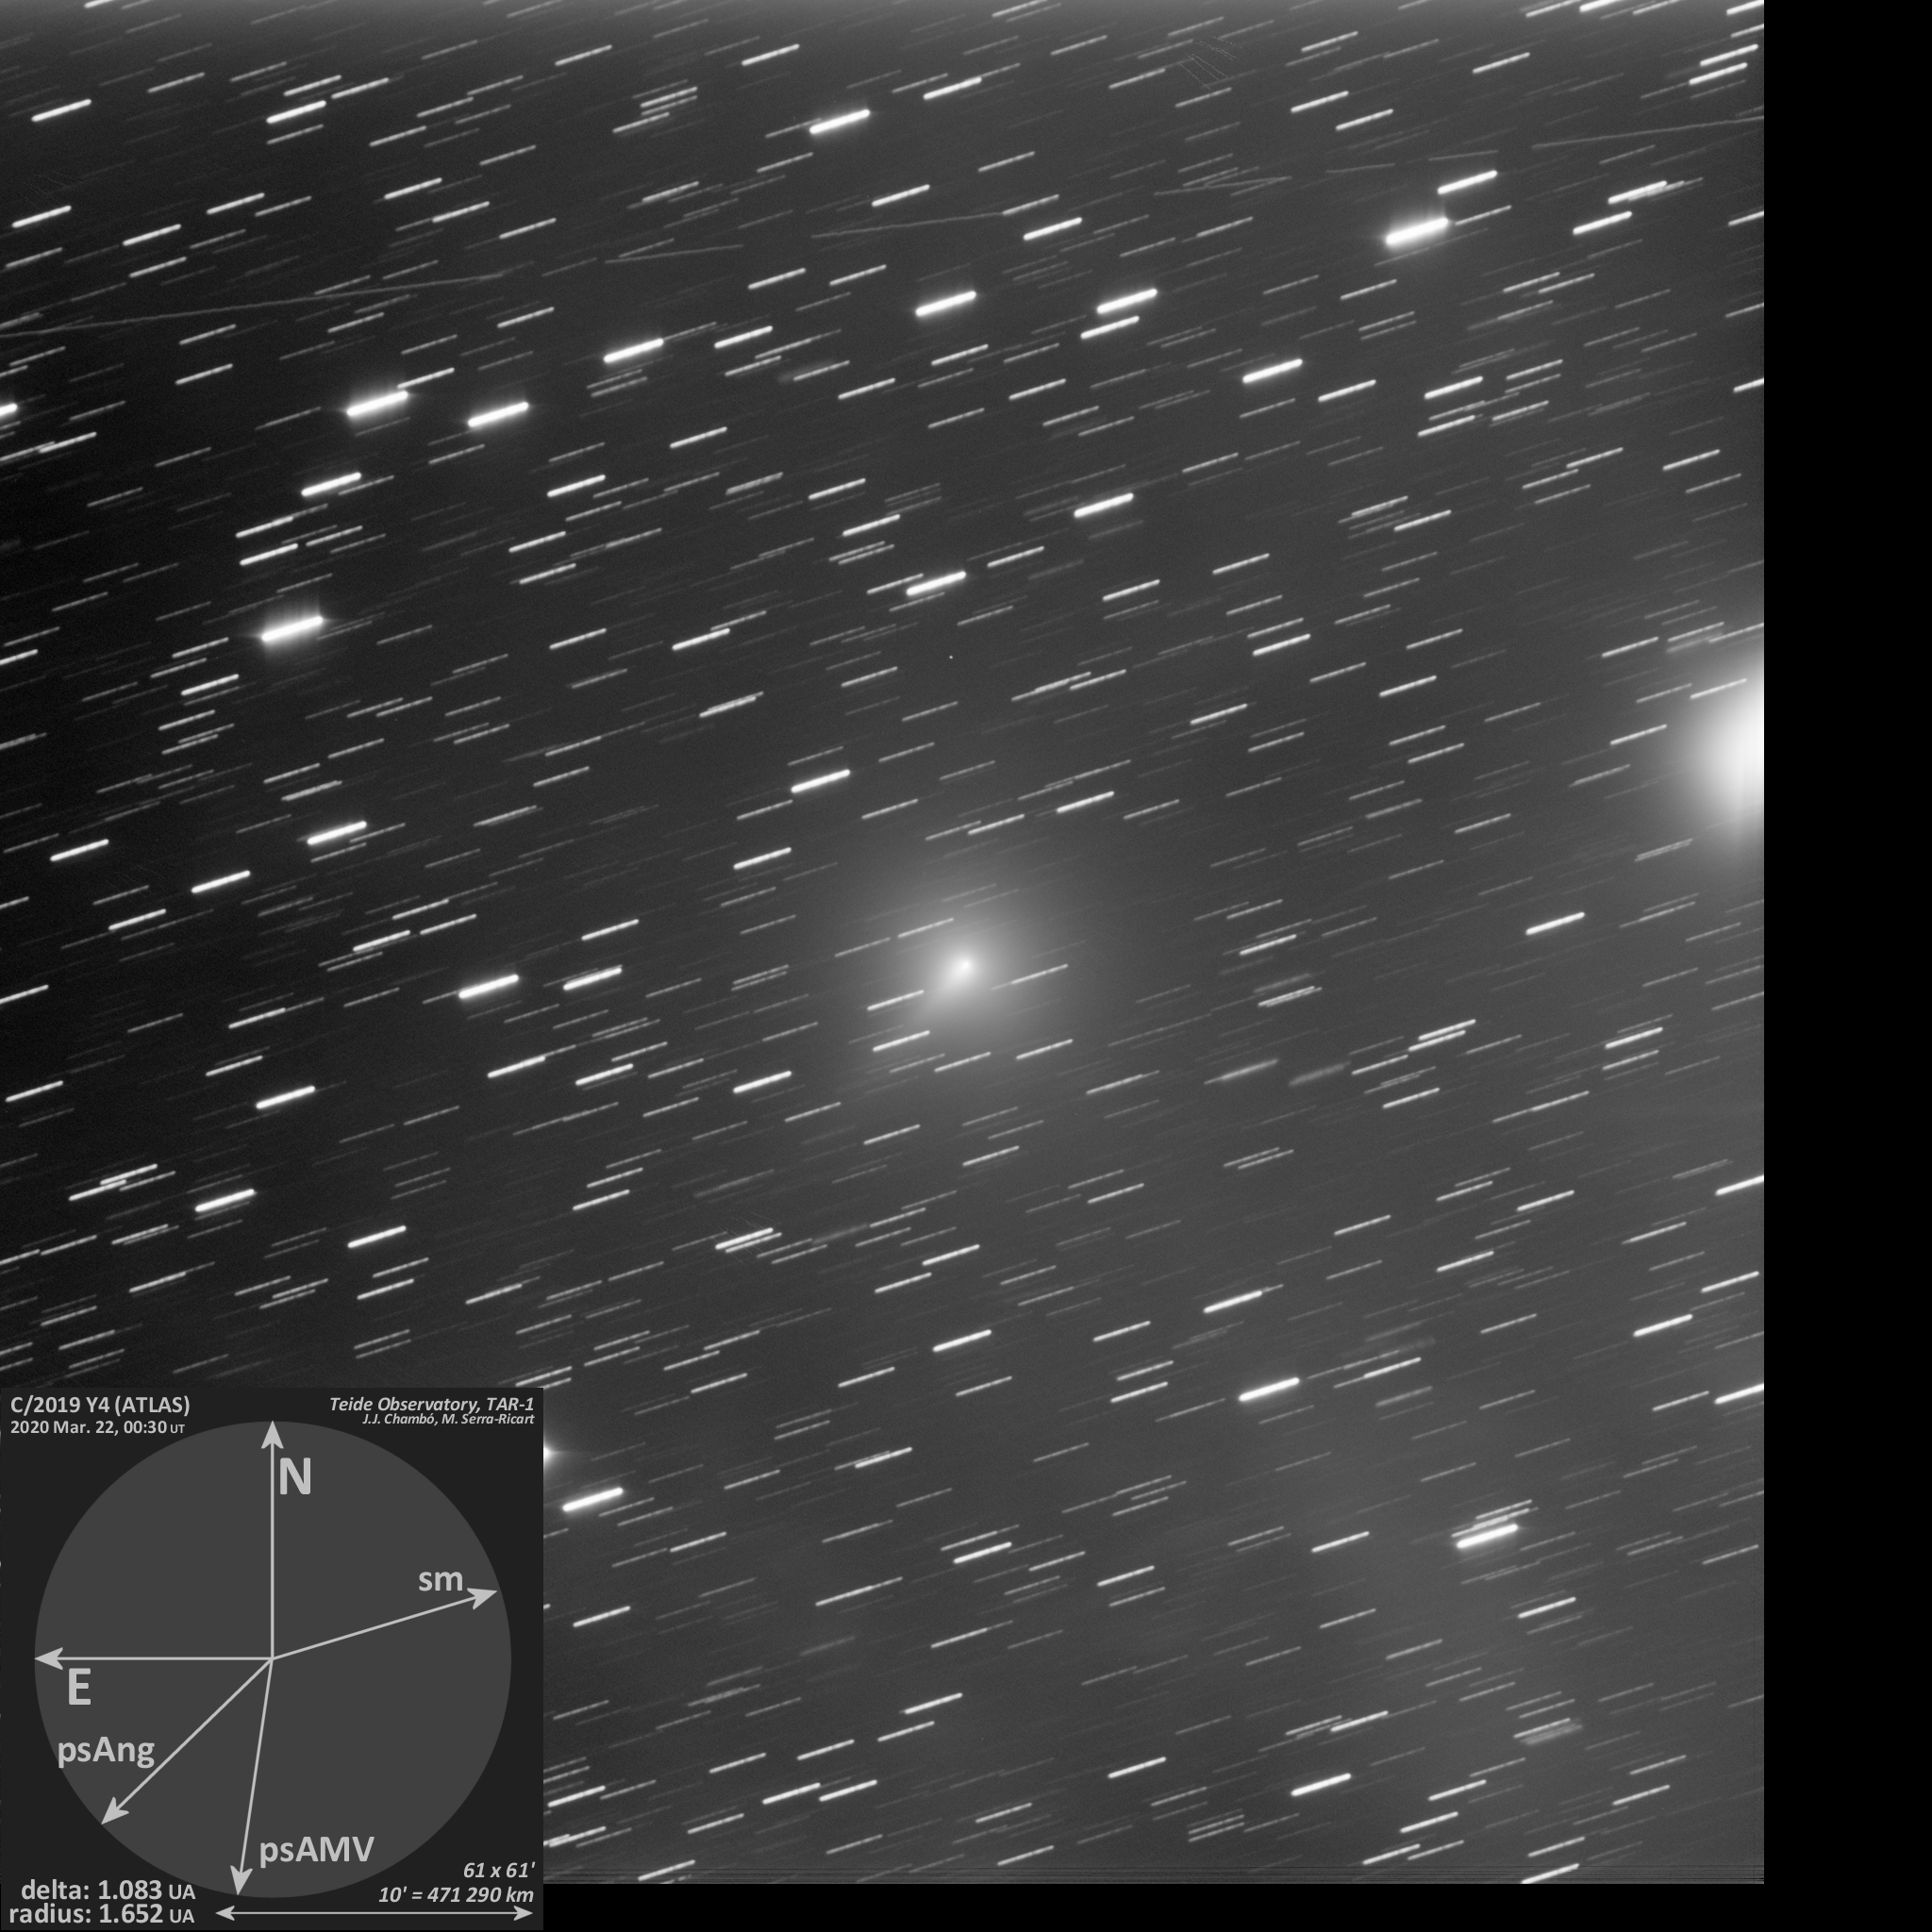 comet C/2019 Y4 (ATLAS) obtained with TAR1